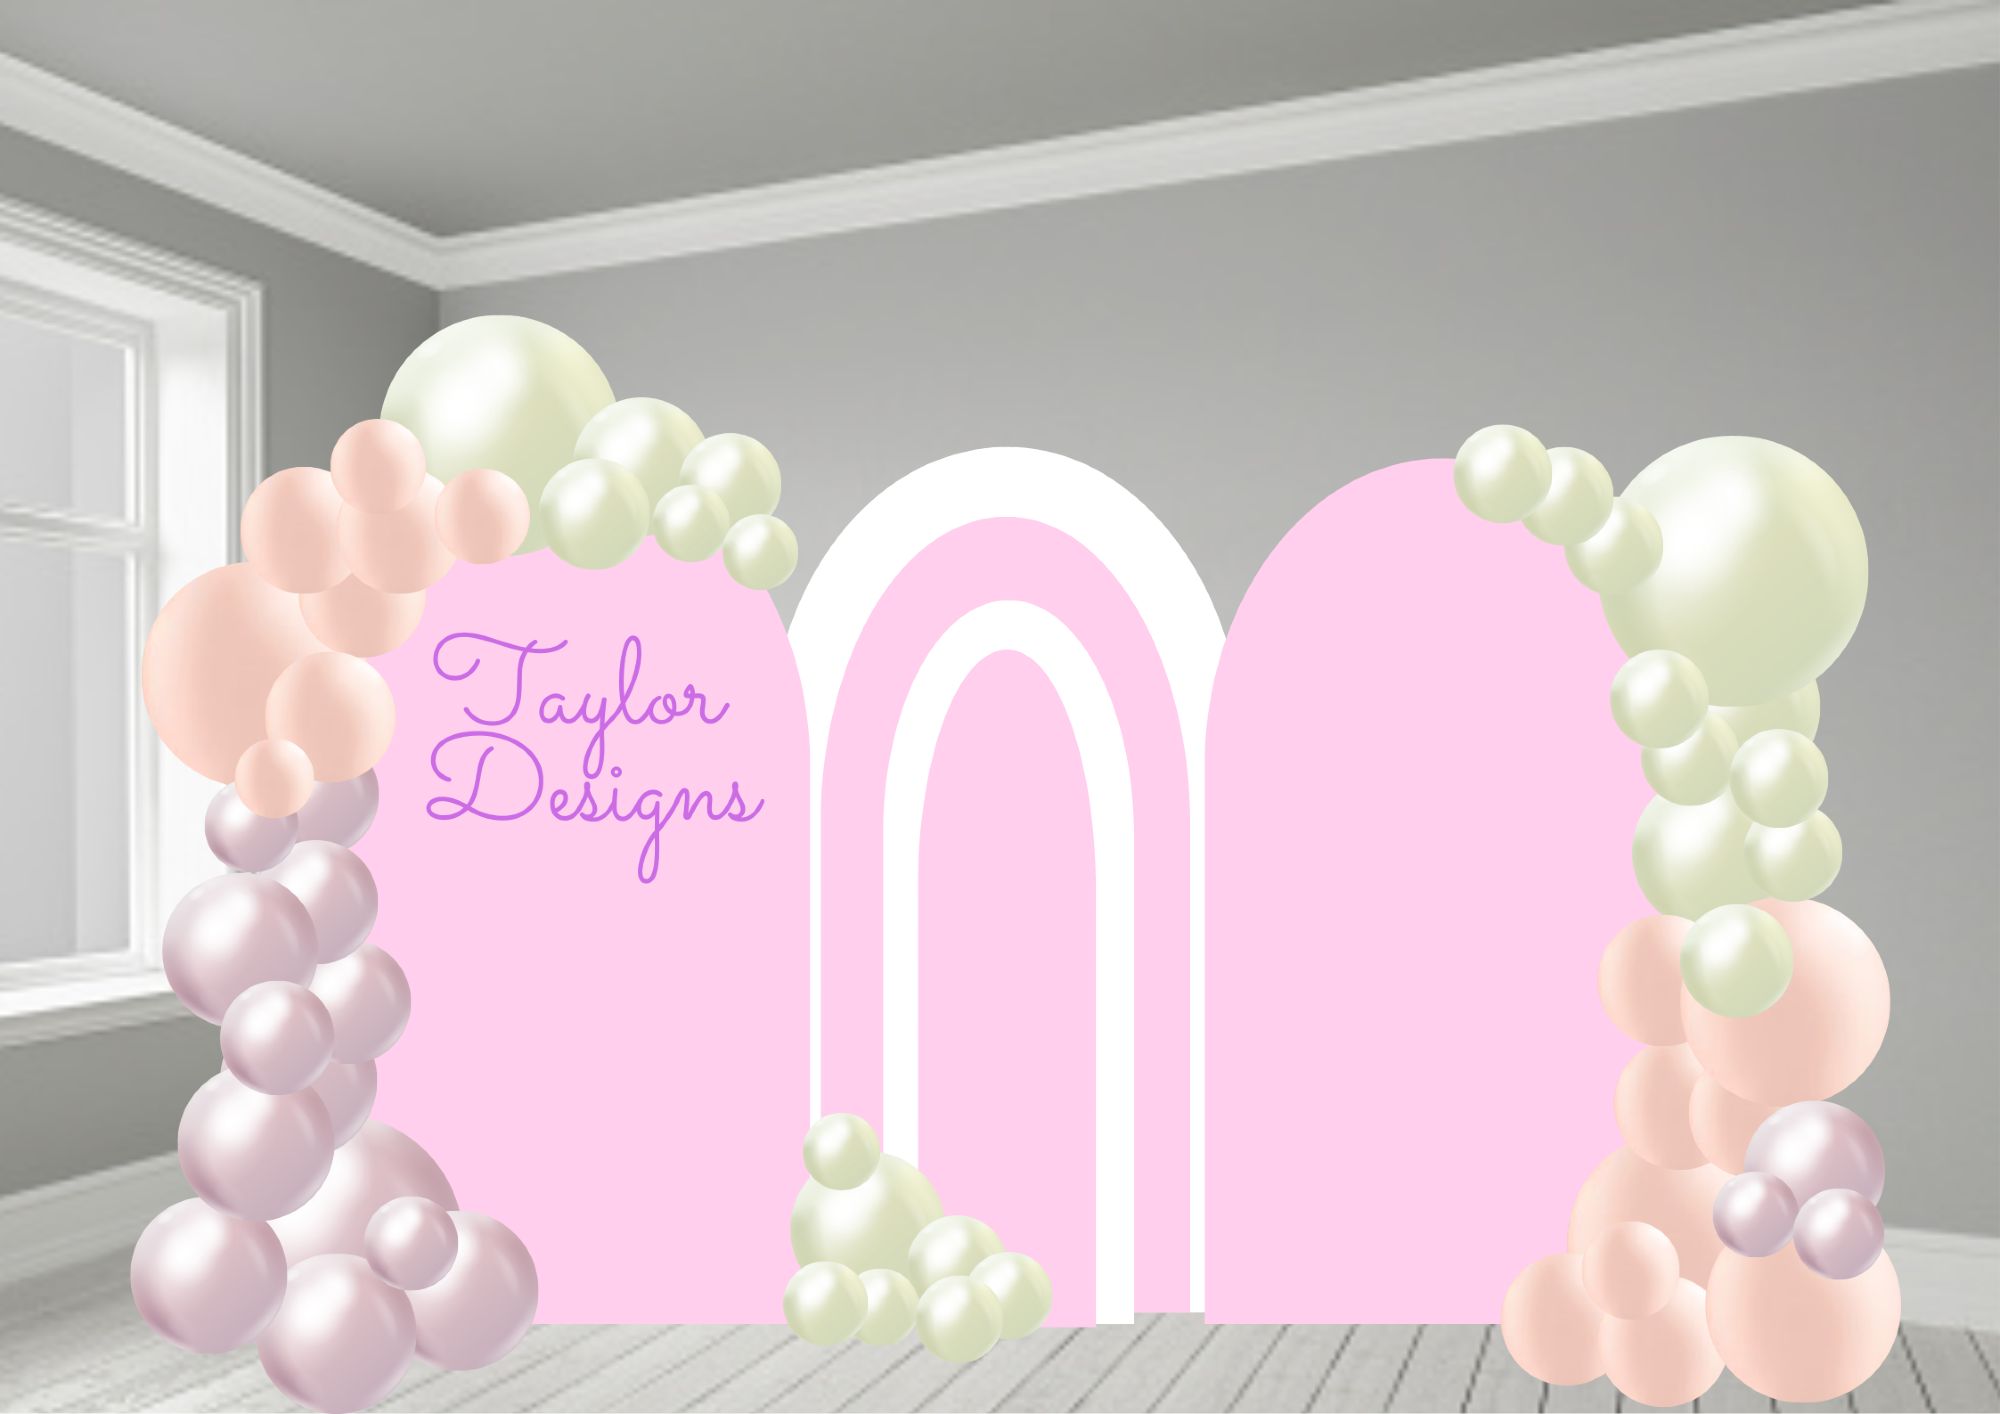 Balloon arch 3 x backdrop with personalisation.